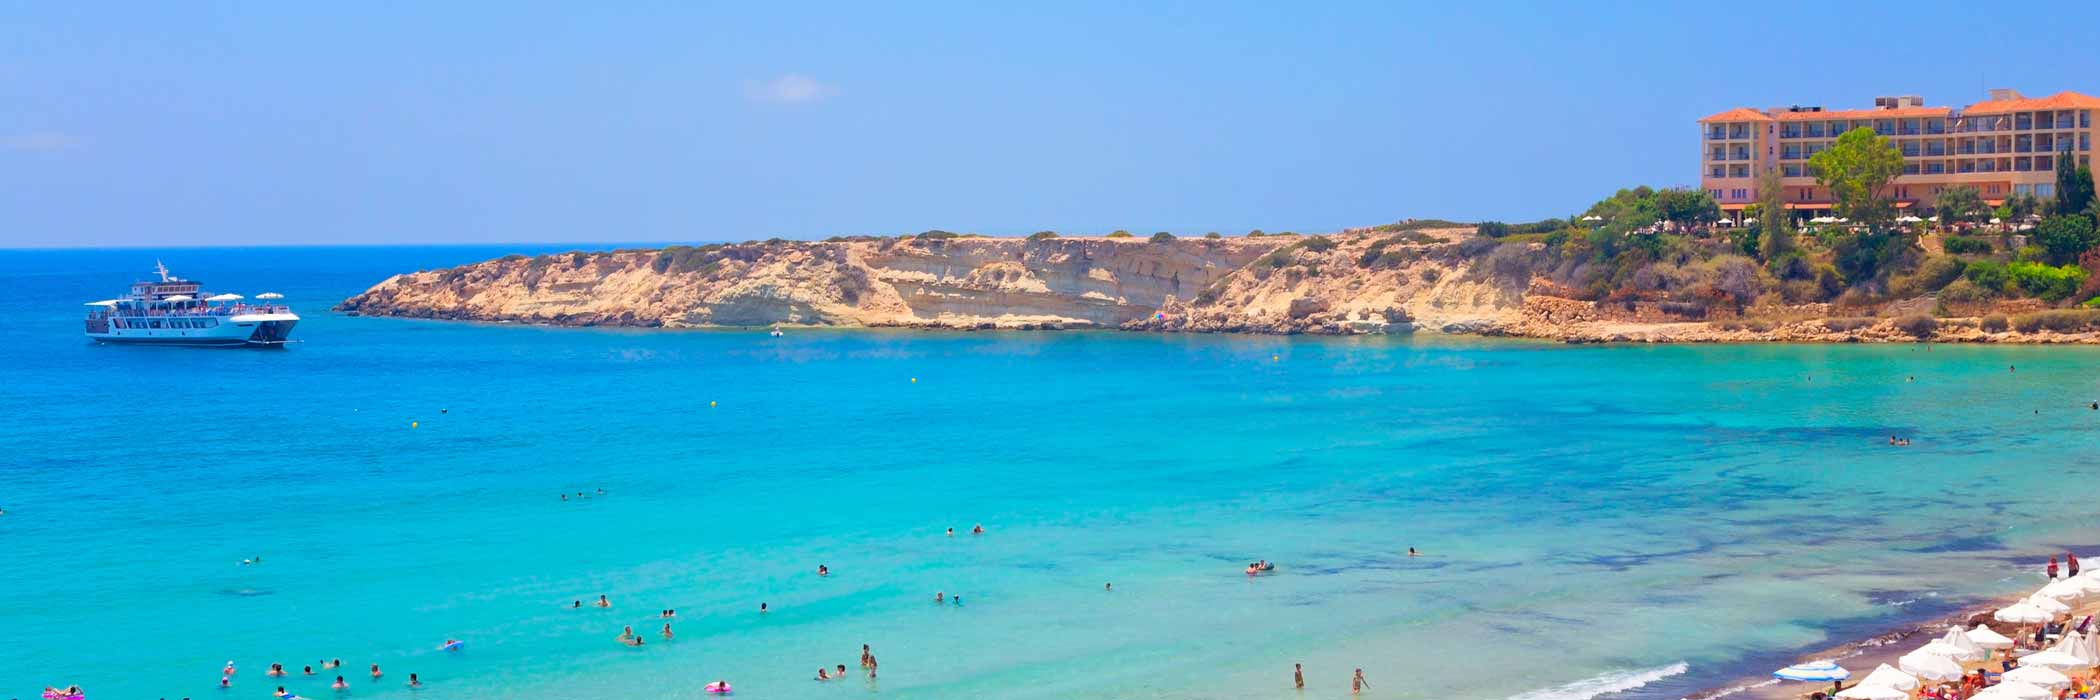 Coral Bay Paphos - All Inclusive Cyprus Holidays